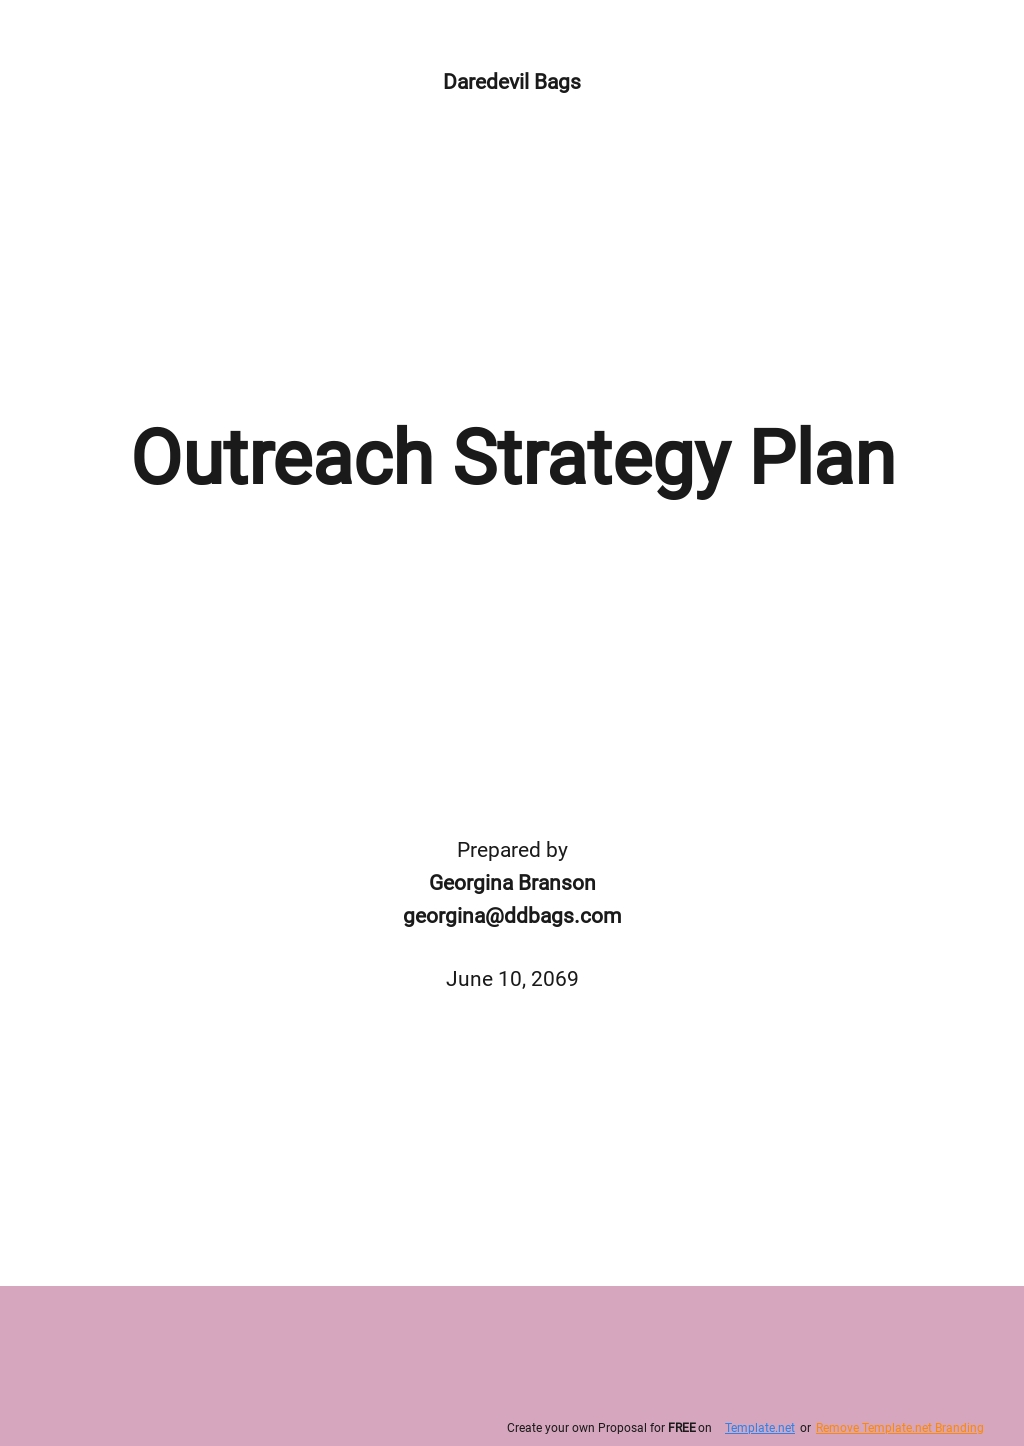 business plan for community outreach